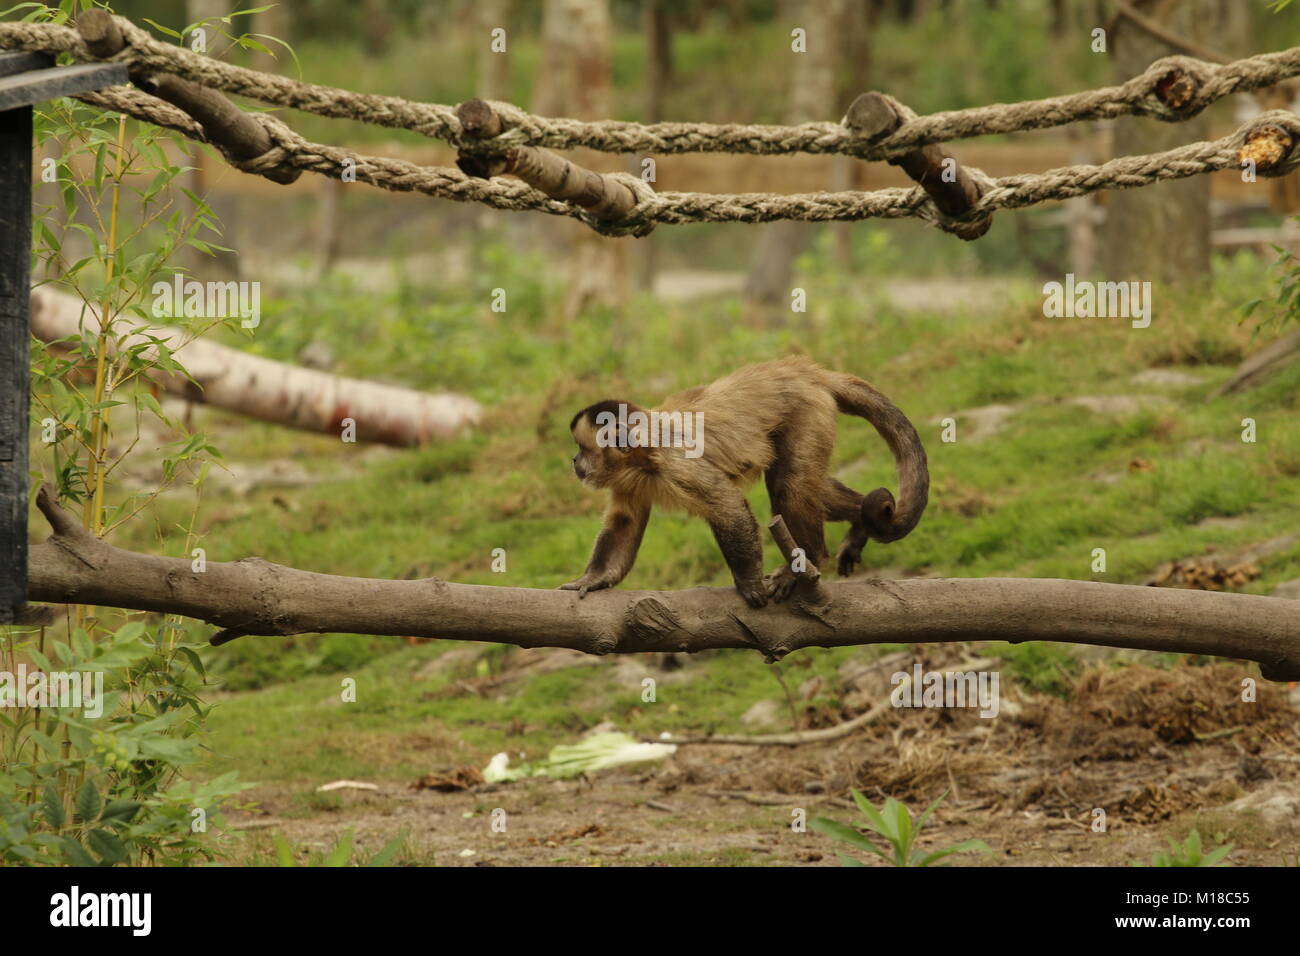 Gracile capuchin monkey in a park Stock Photo